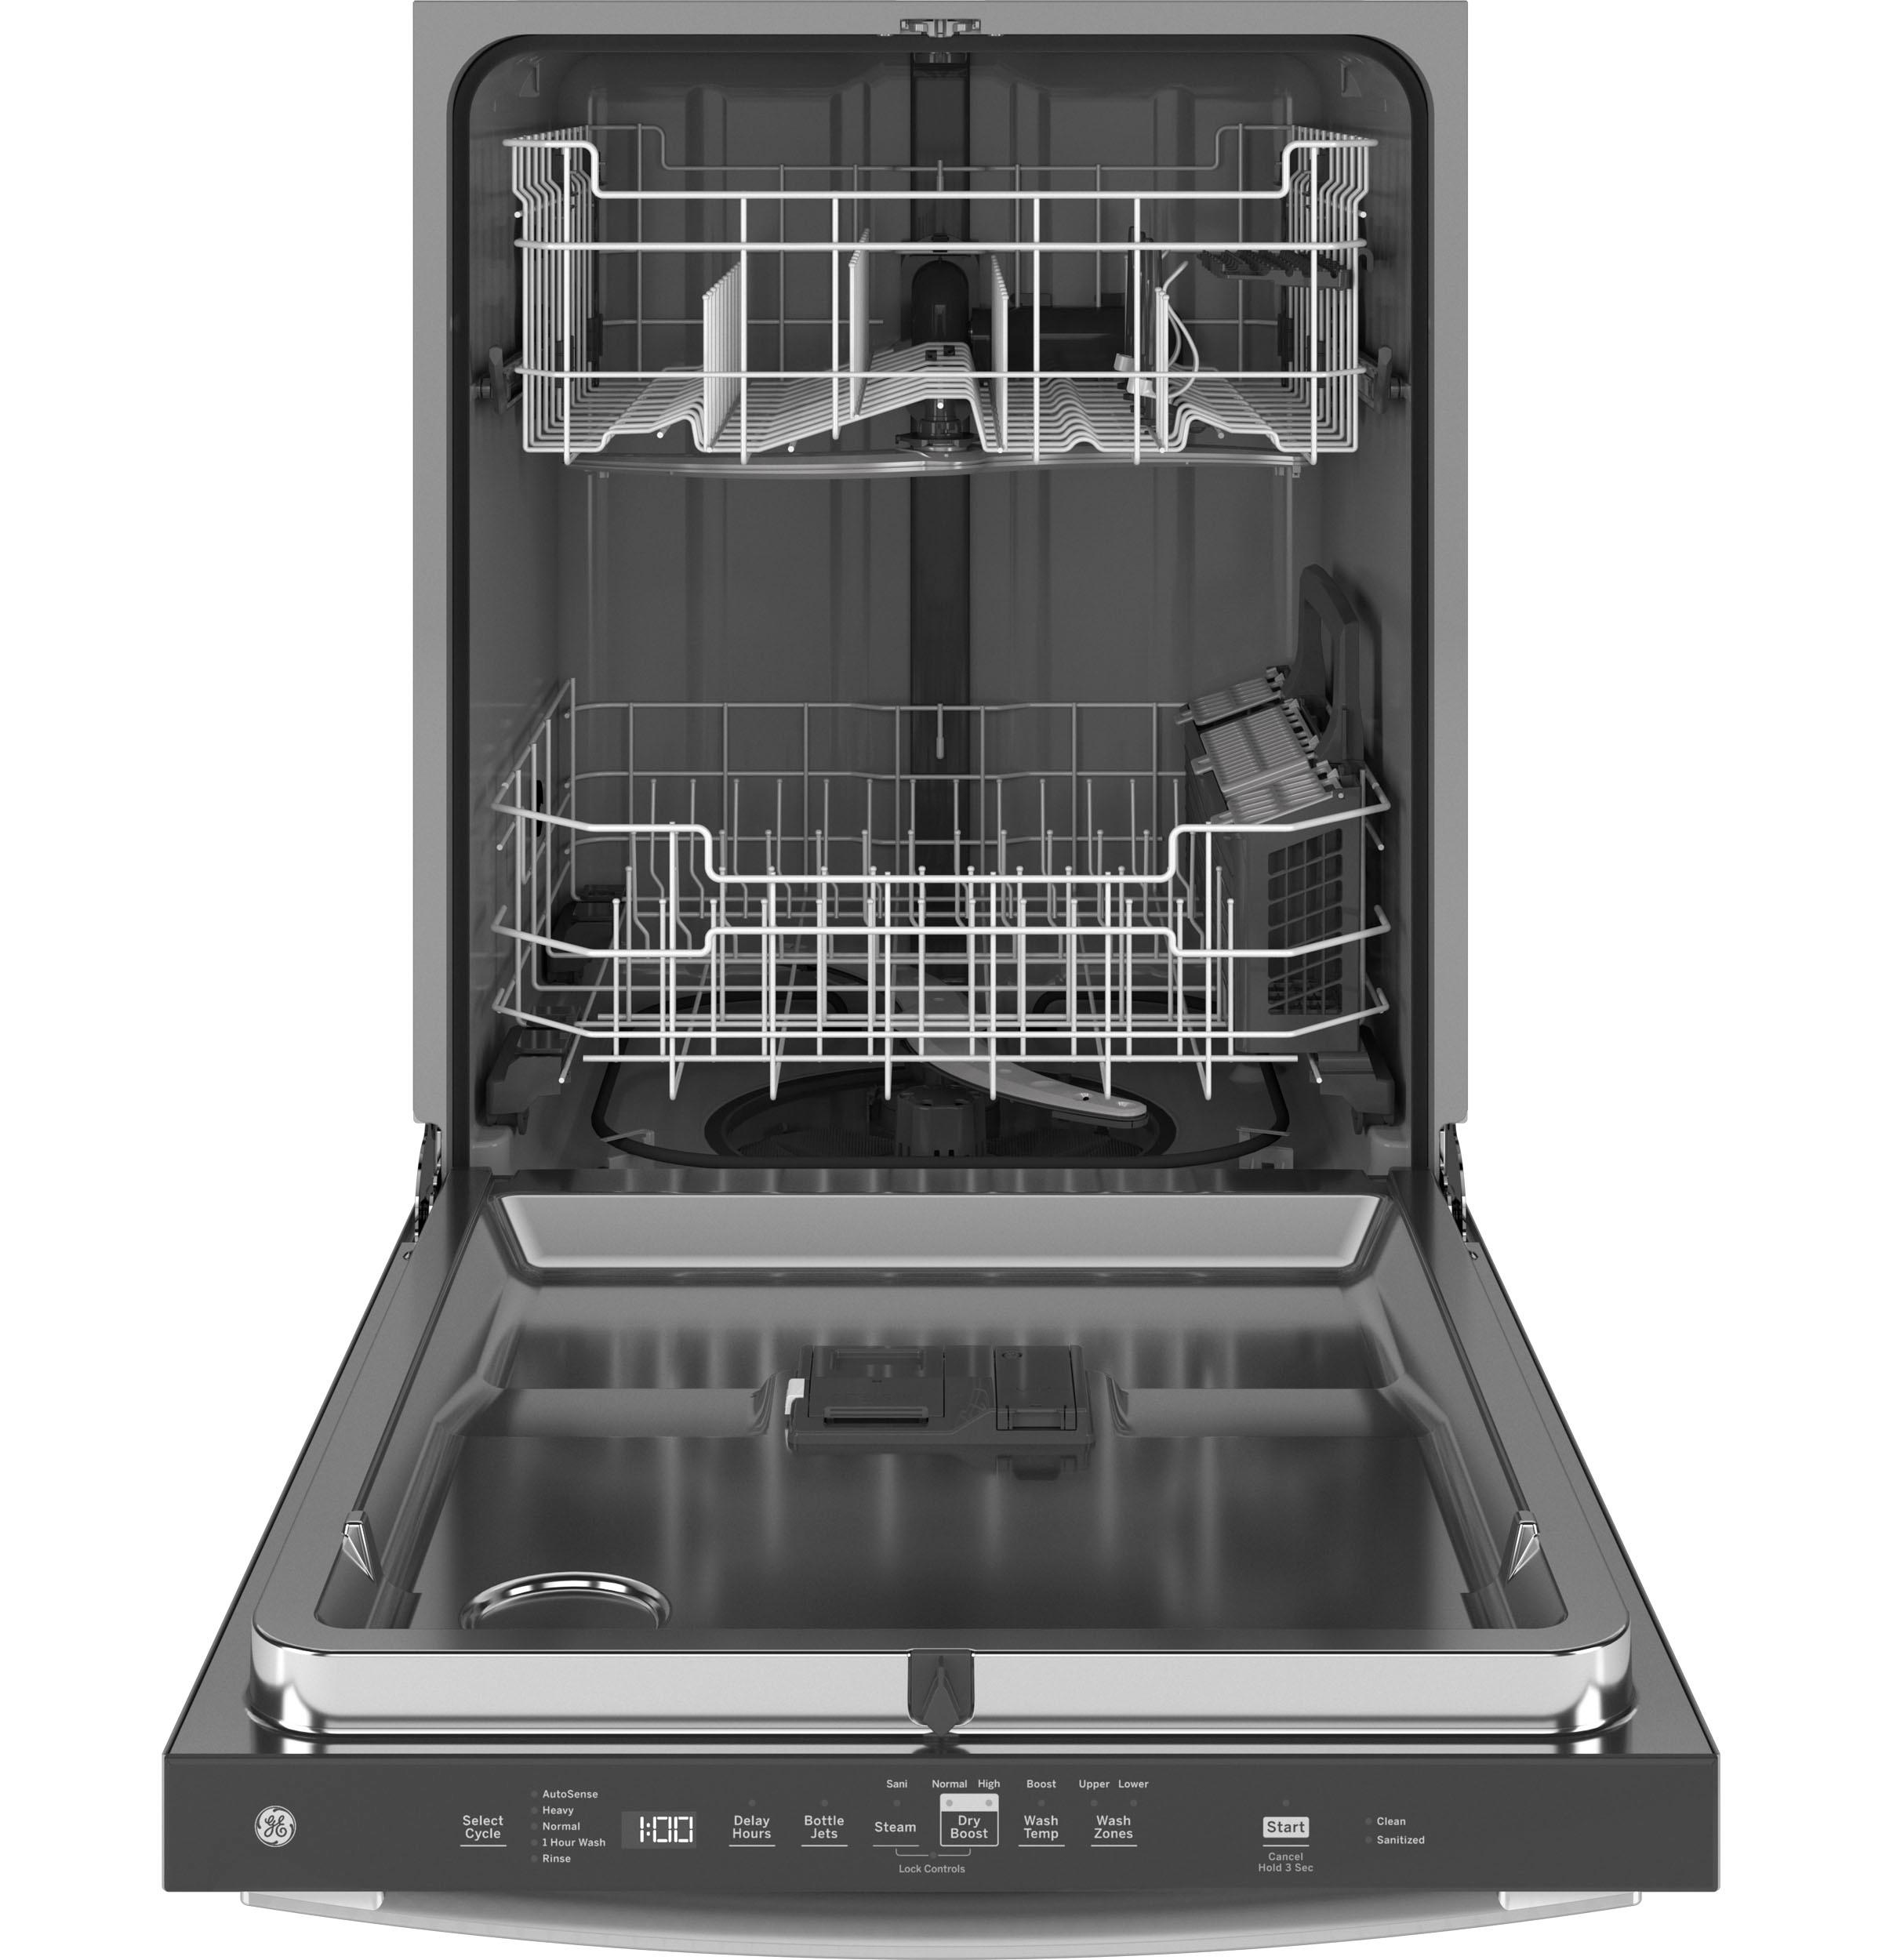 GE® ENERGY STAR® Top Control with Stainless Steel Interior Door Dishwasher with Sanitize Cycle